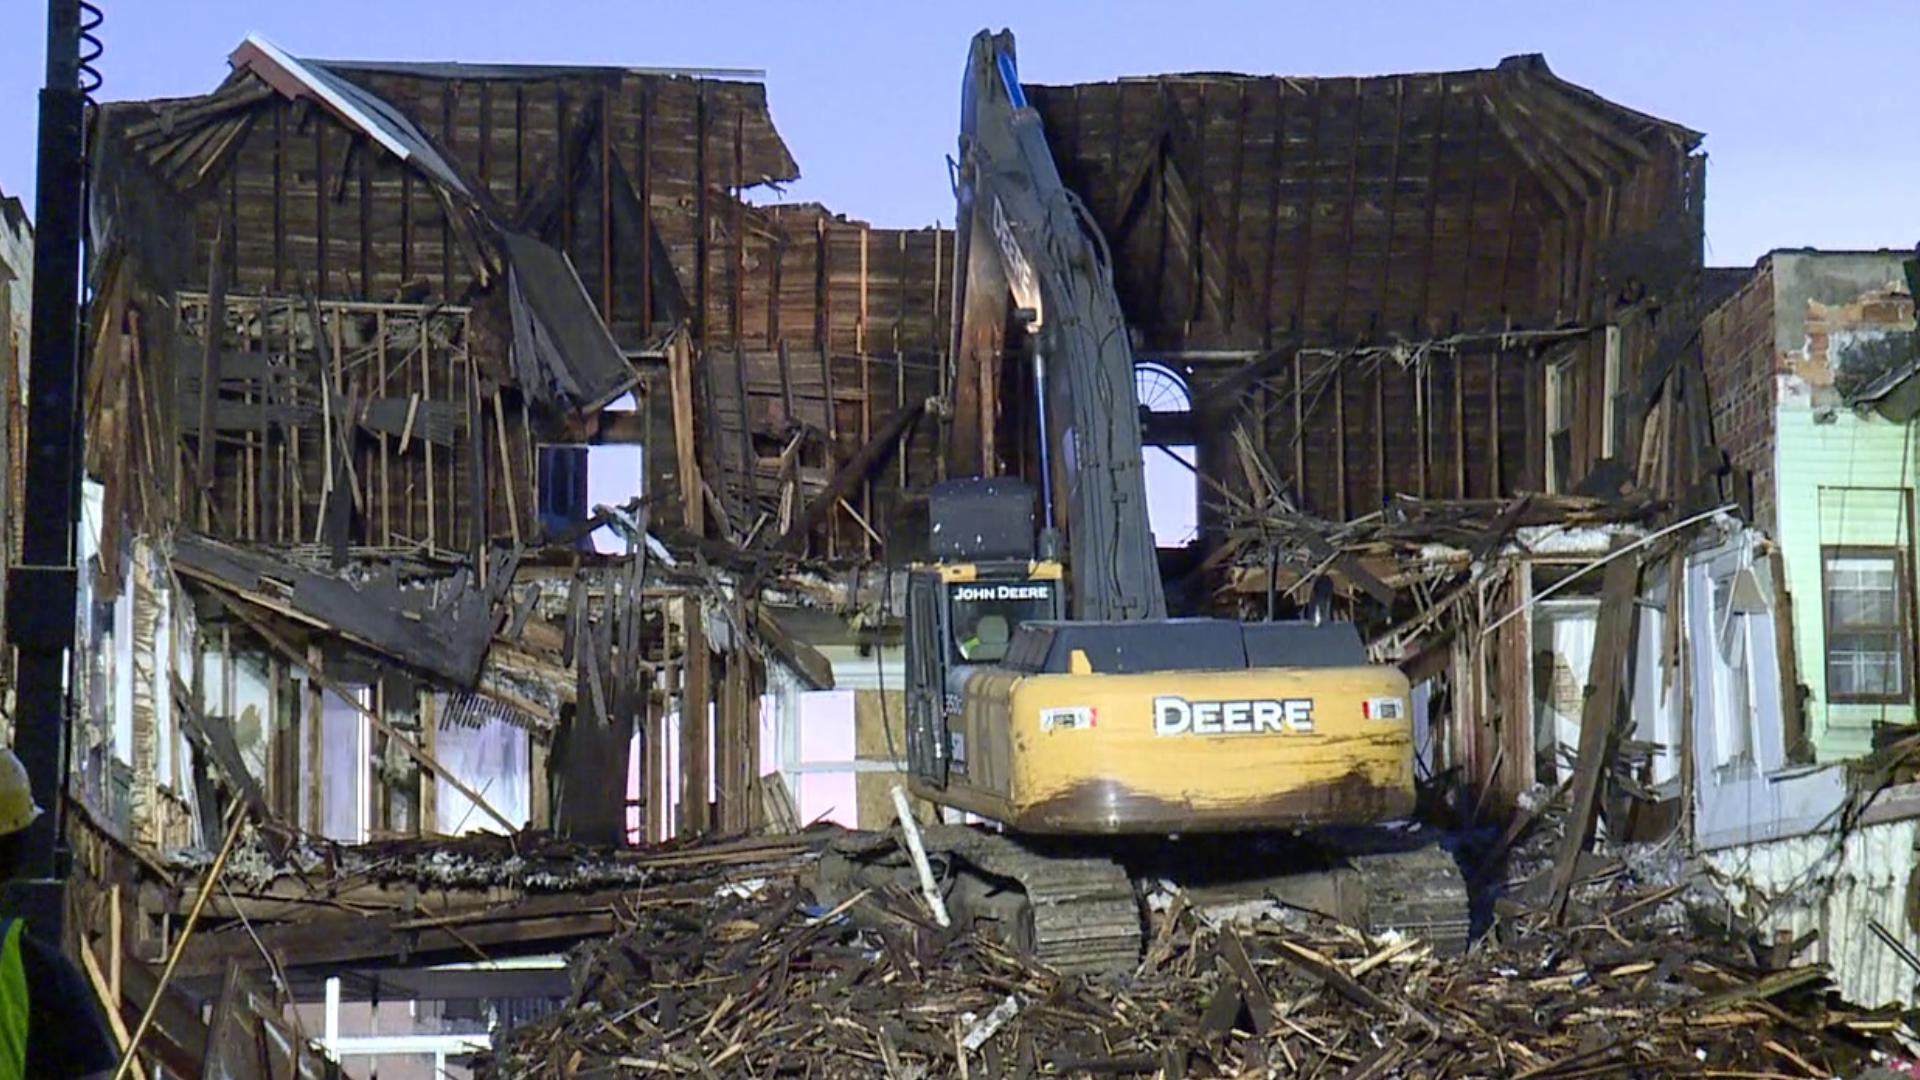 A time-lapse of the demolition during the time WNEP there.